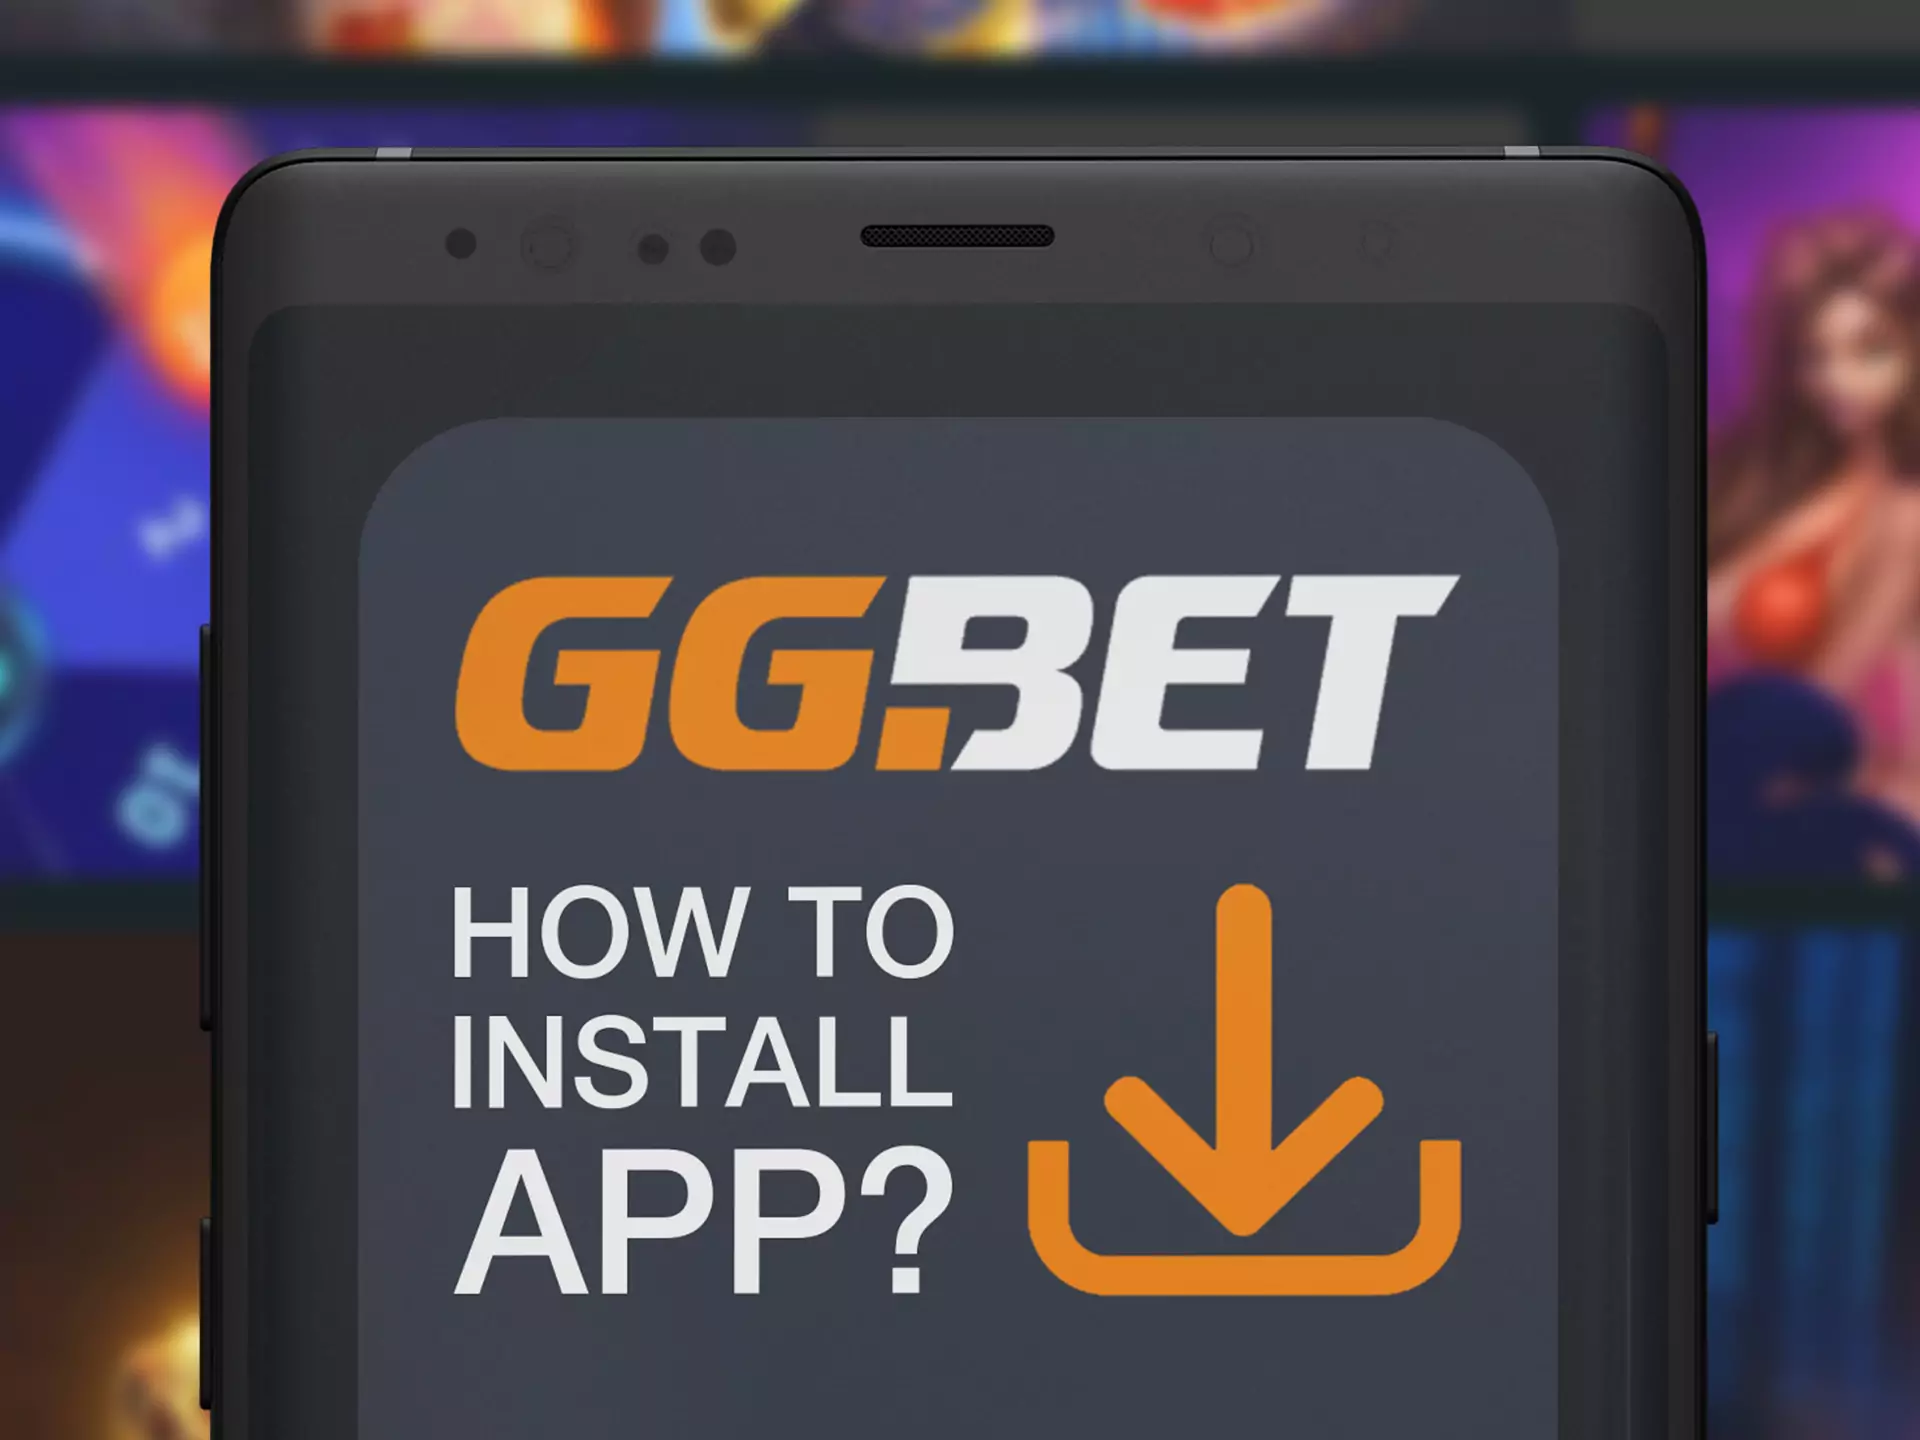 Intallation of GGBet app on your device is easy.